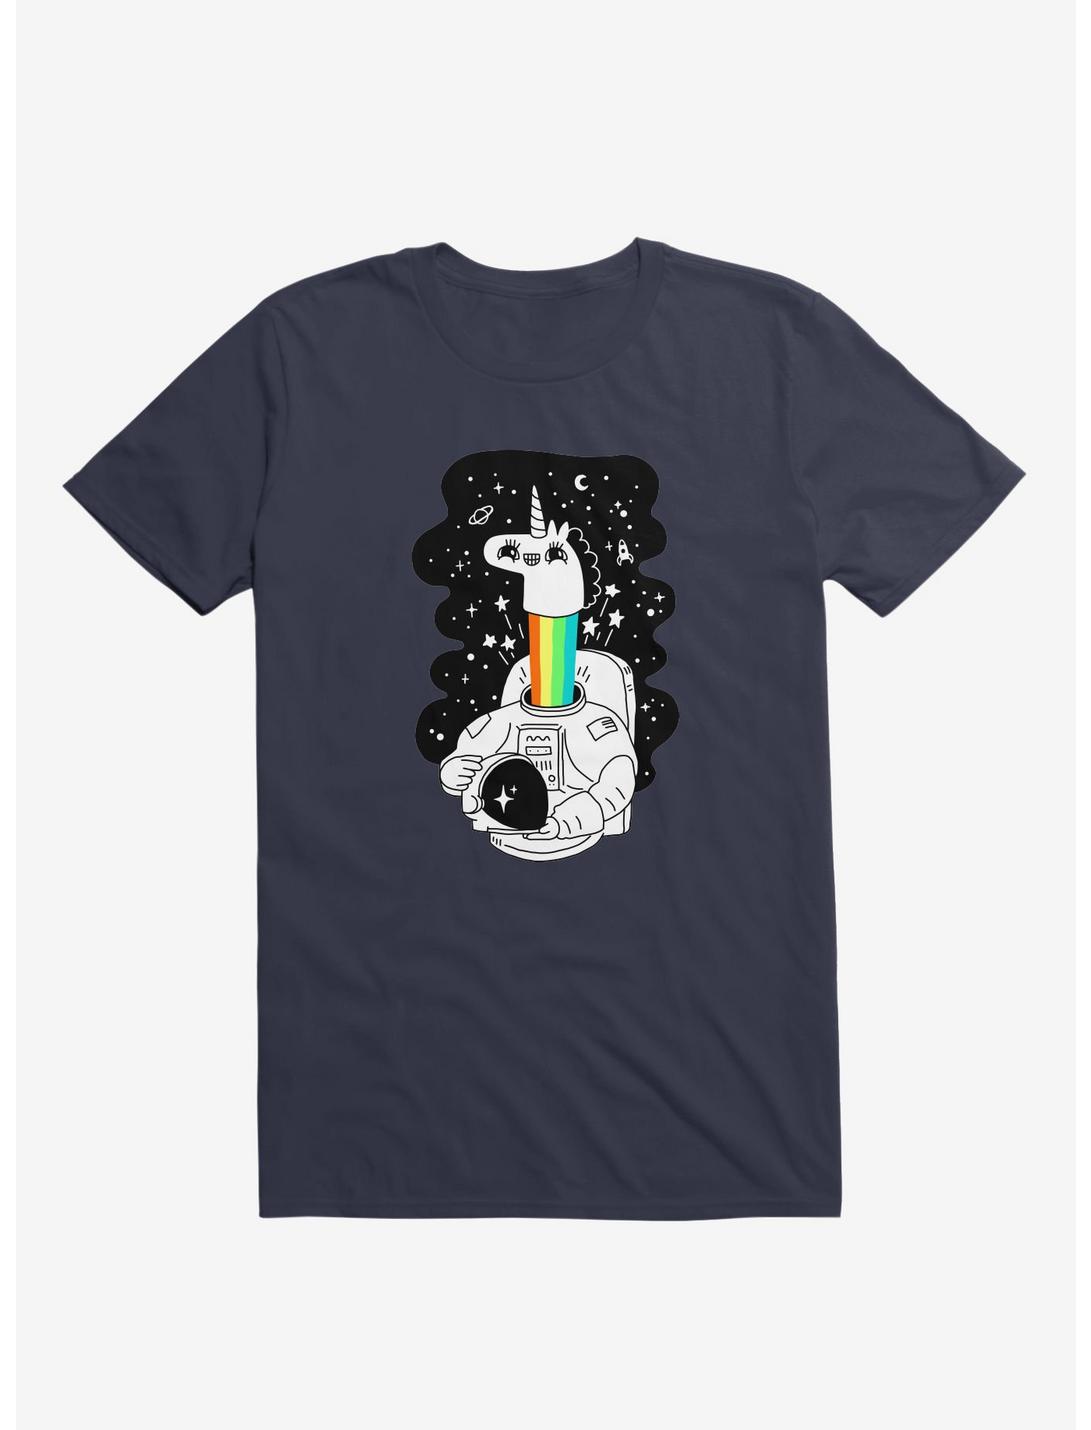 See You In Space! T-Shirt, NAVY, hi-res